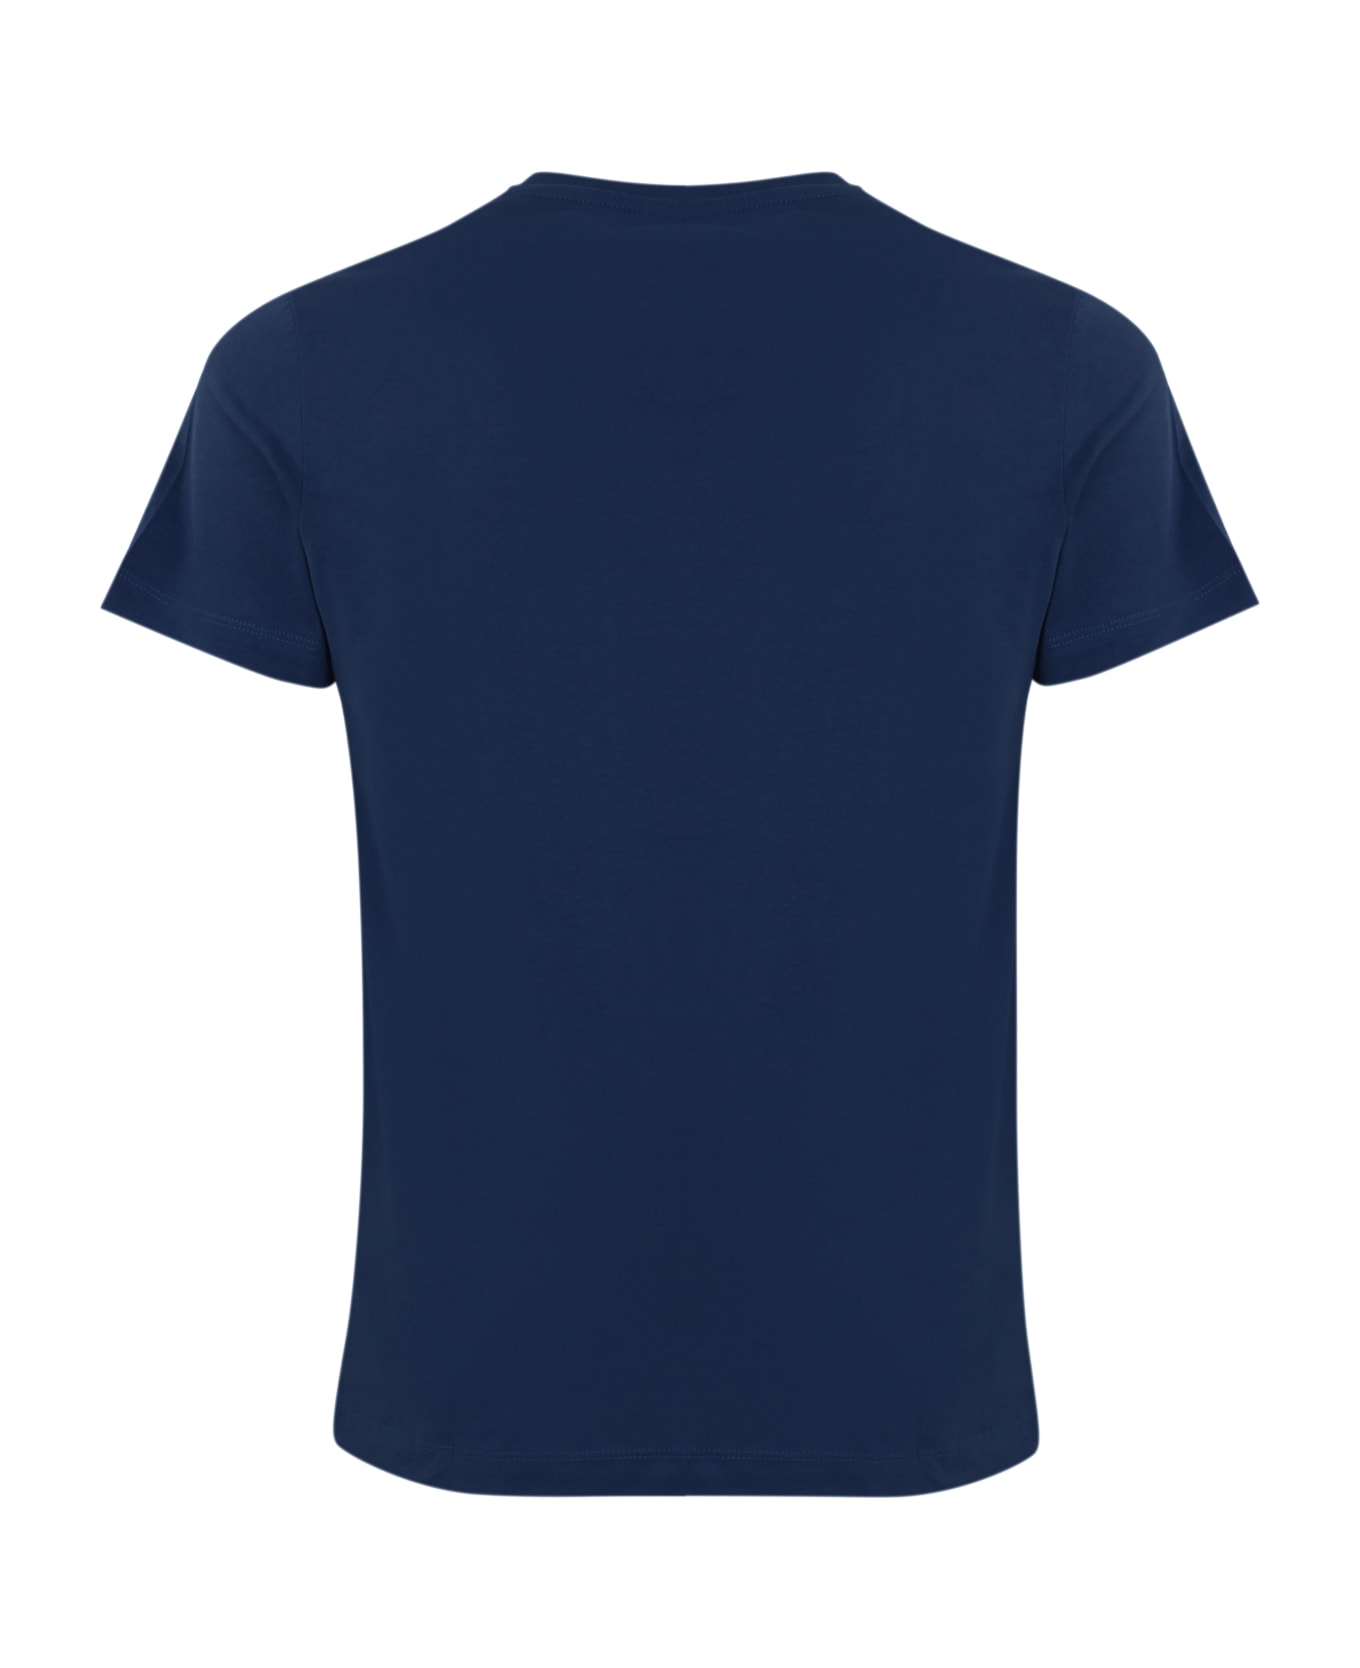 Roy Rogers Cotton T-shirt With Logo - Blue navy